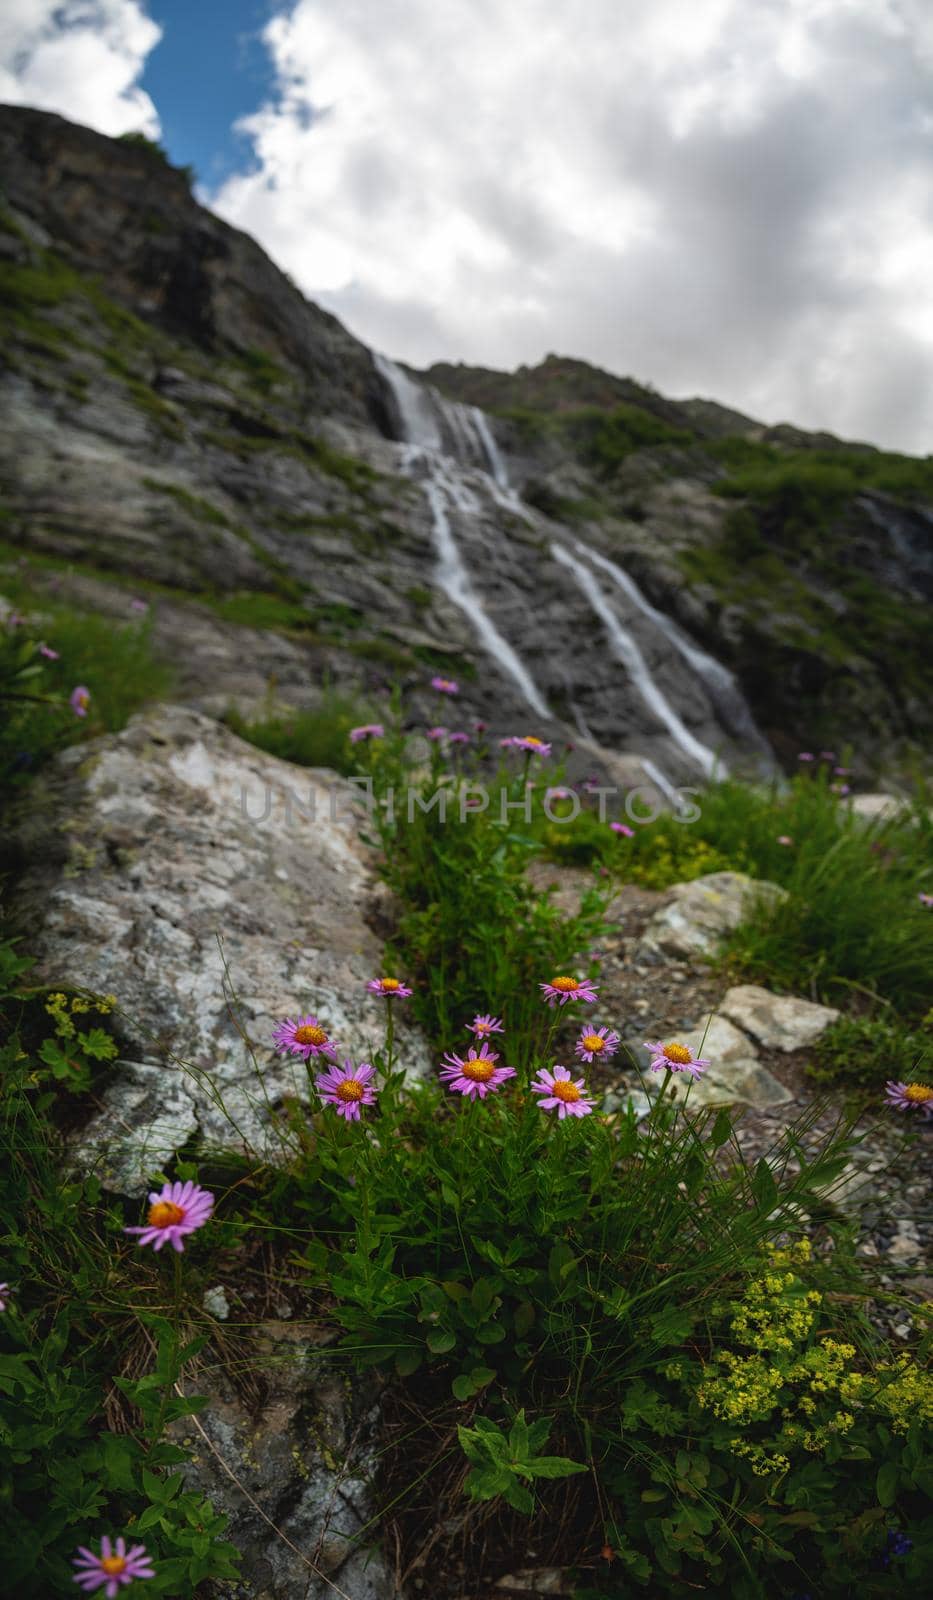 pink mountain flowers close-up, against the background of a blurry waterfall falling from a sheer cliff by yanik88